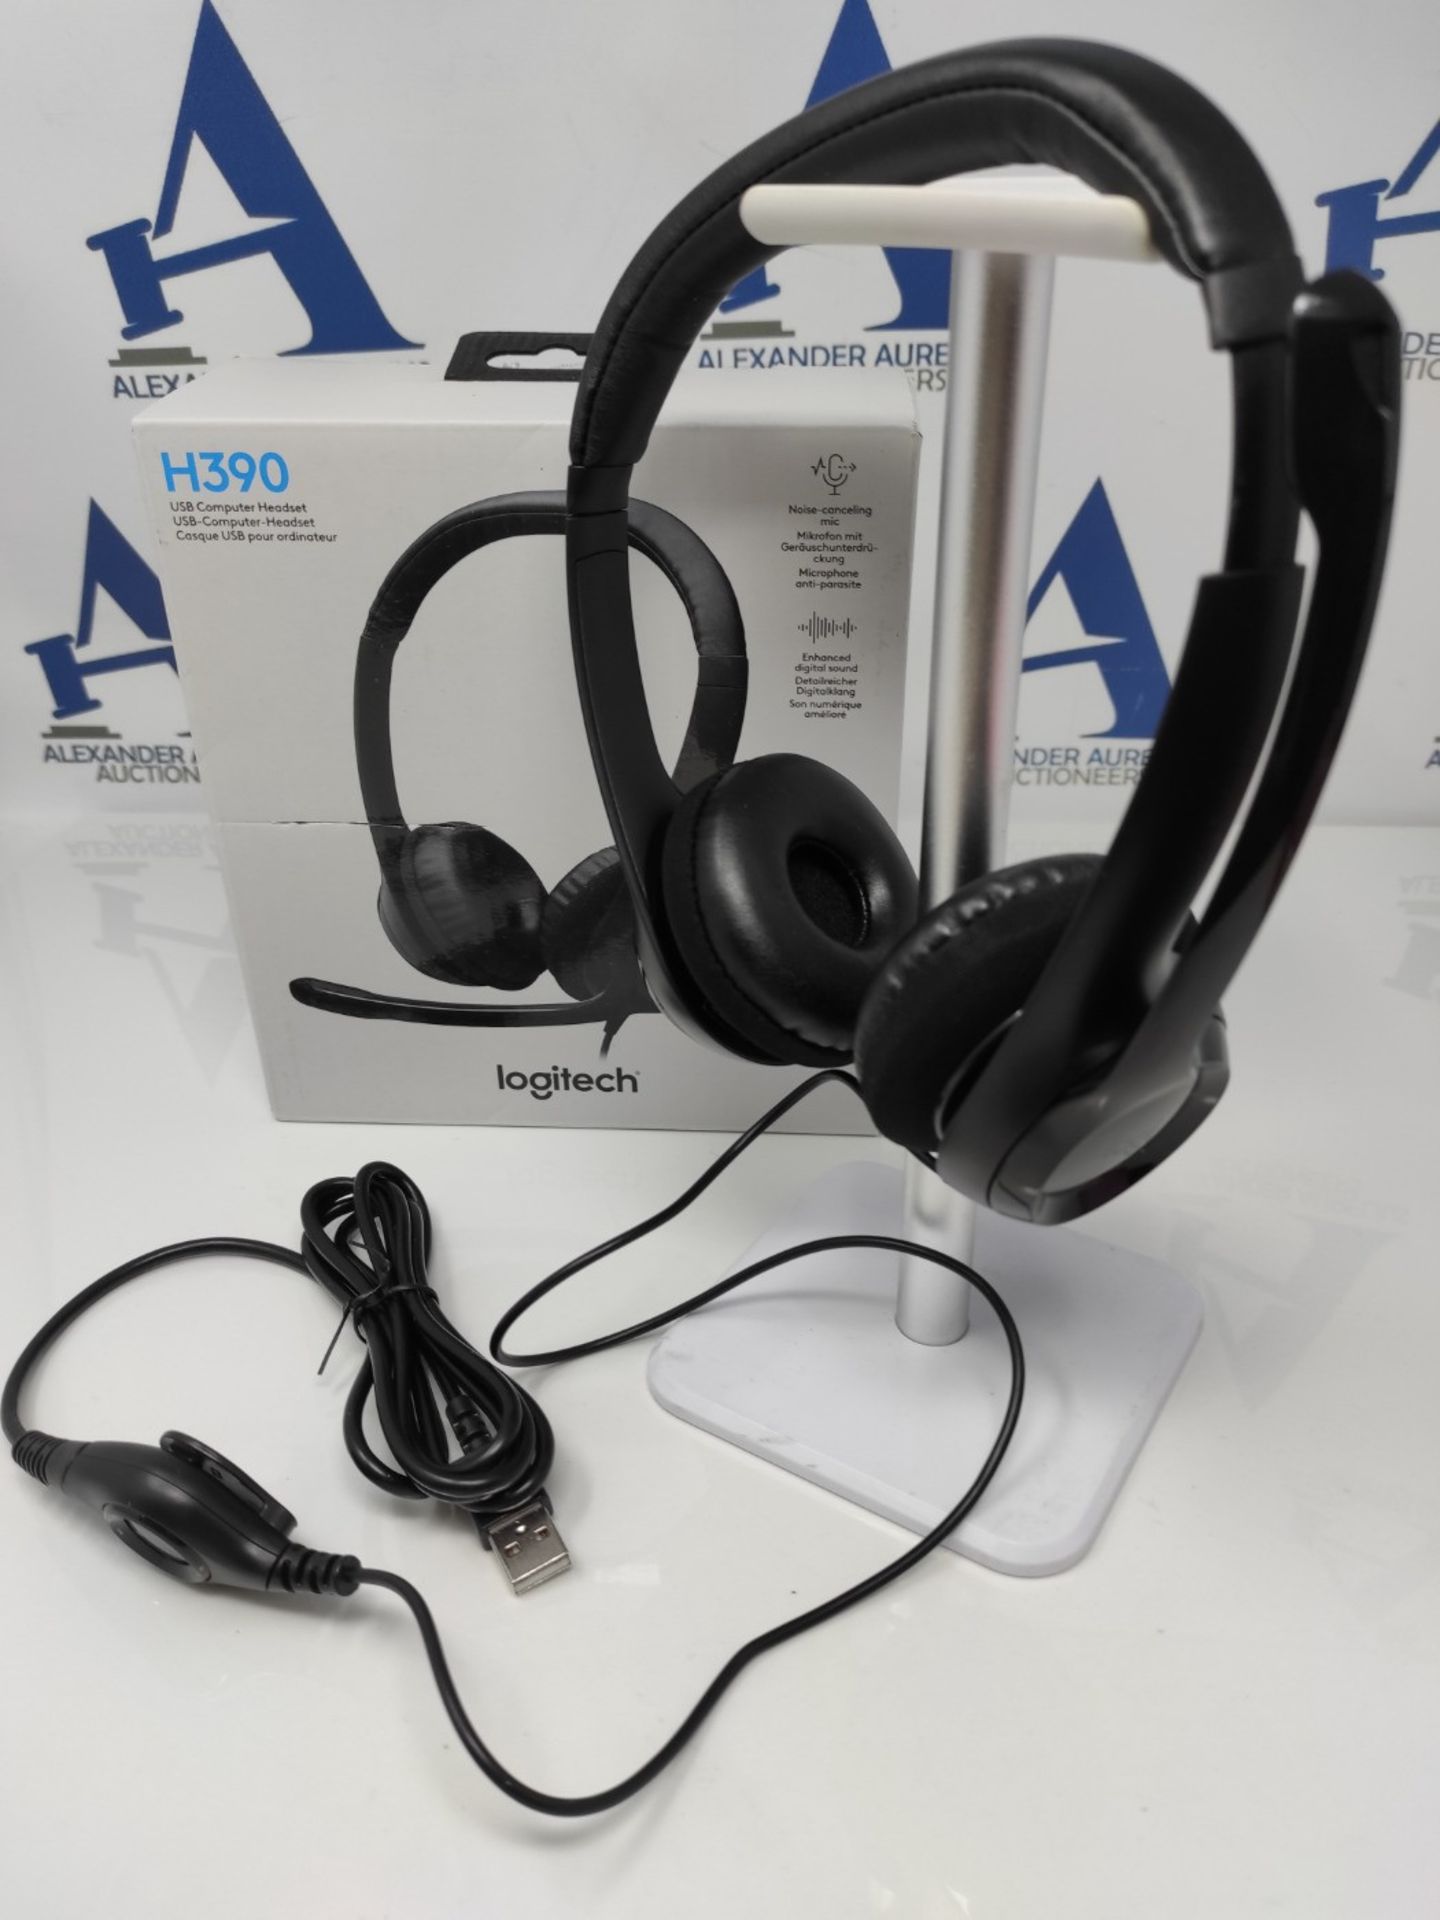 Logitech H390 Headphones with Microphone, Stereo Headset, Noise-canceling Microphone, - Image 2 of 2